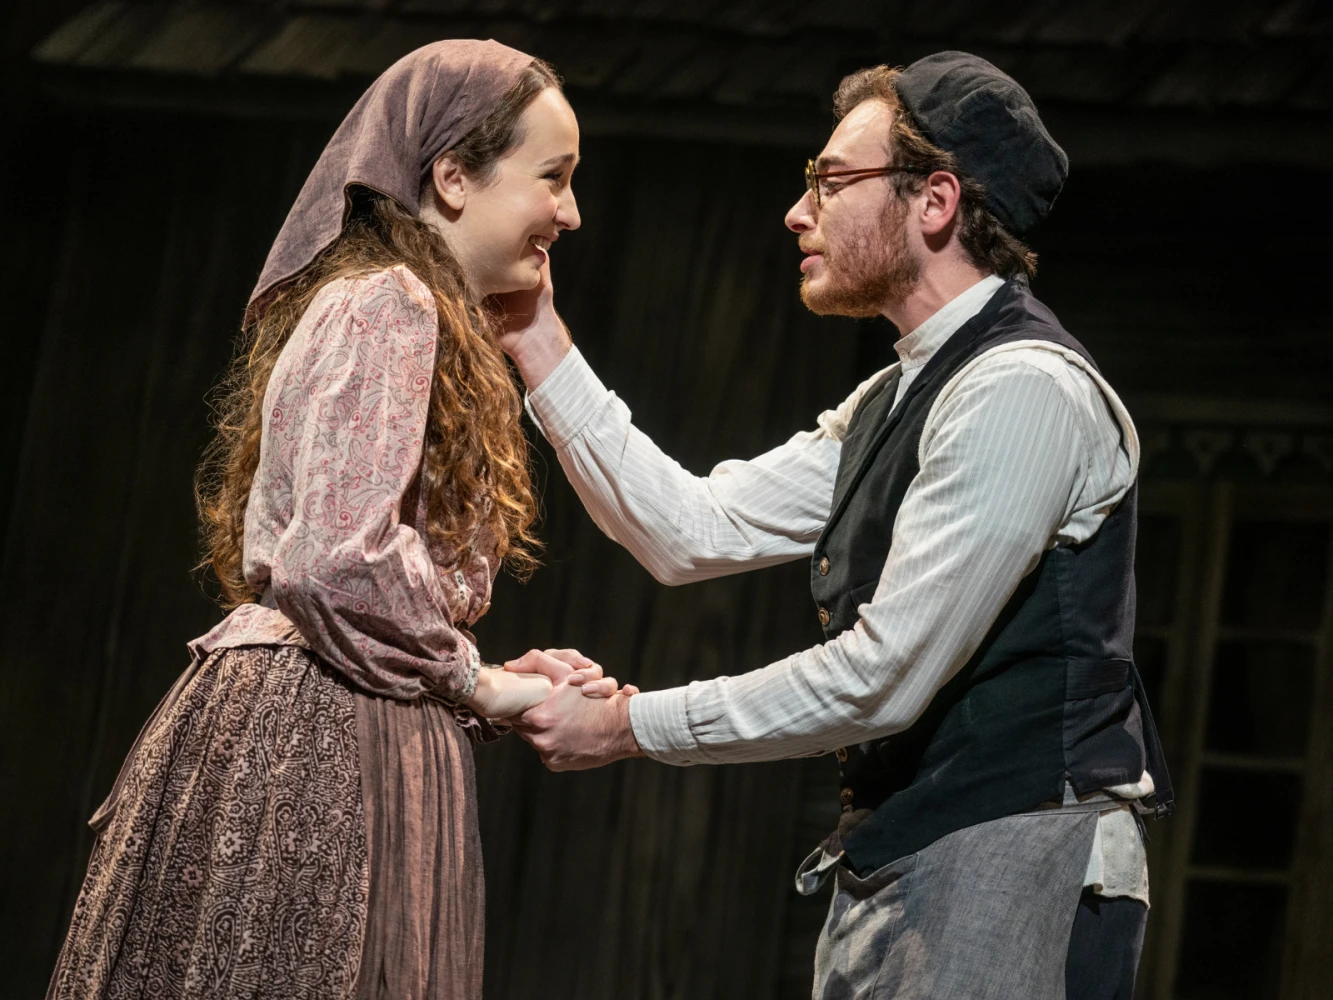 Fiddler on the Roof: What to expect - 3